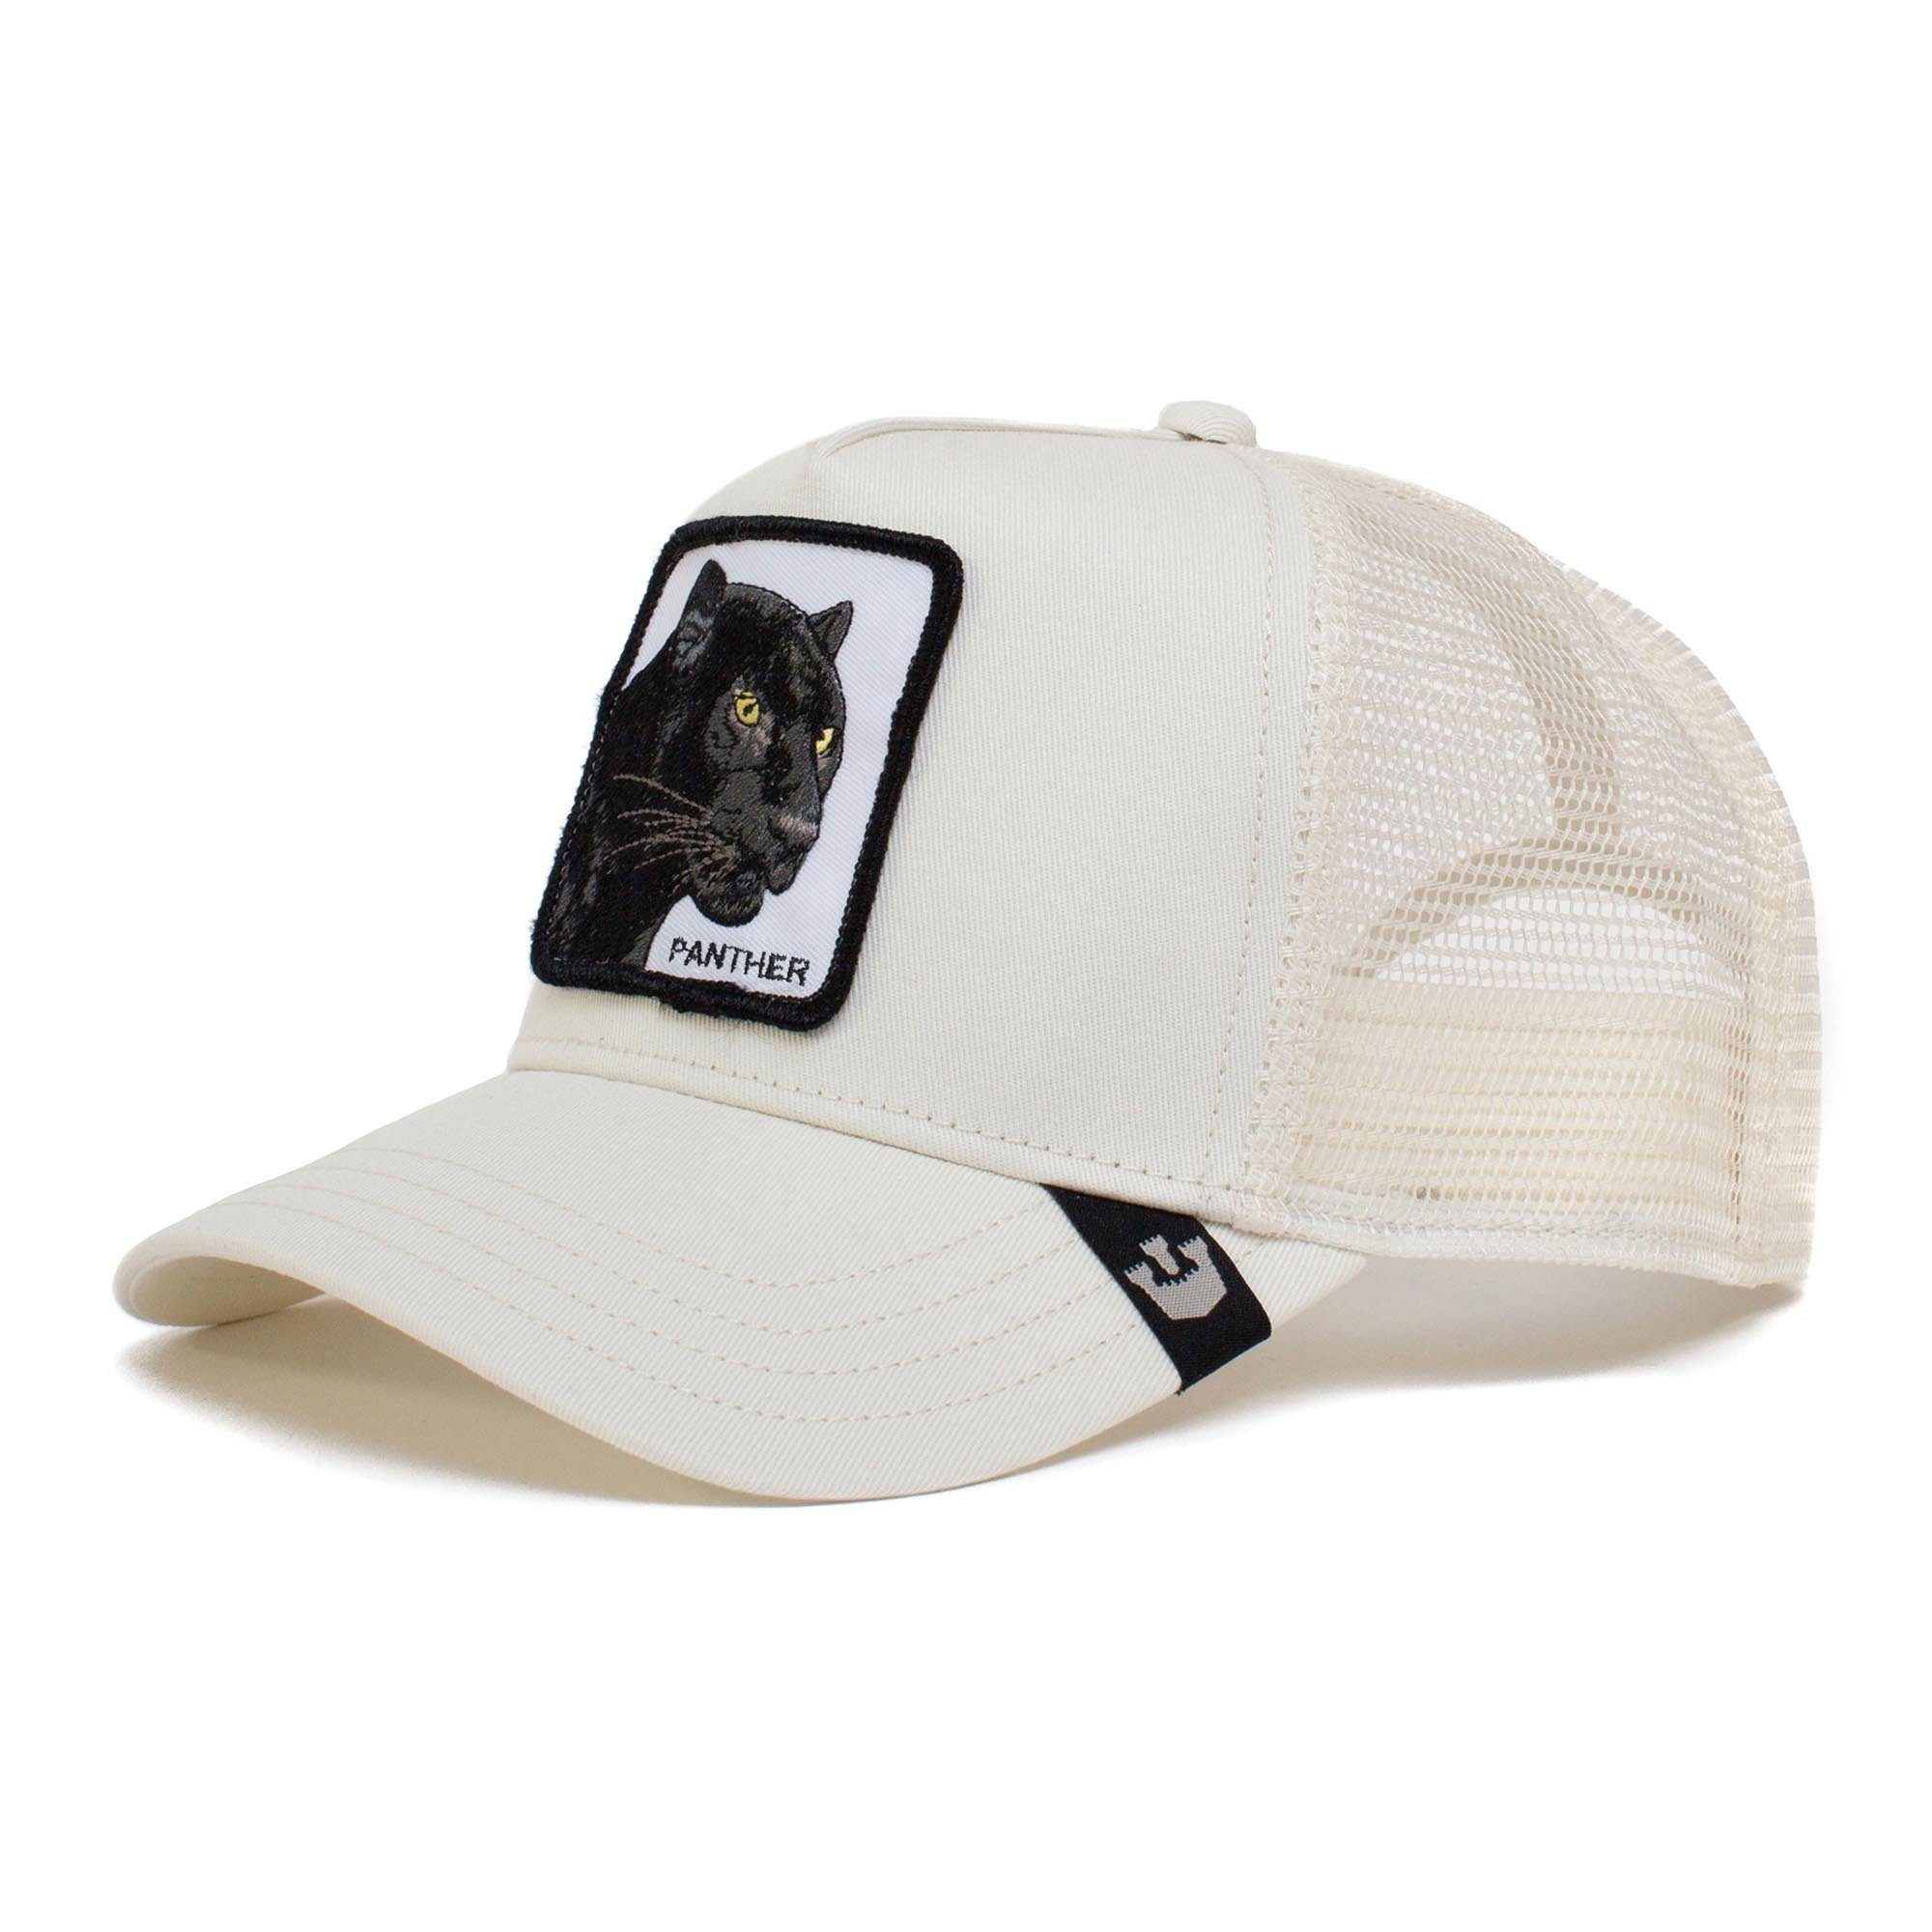 The Panther Size GOORIN Trucker - Cap Kappe, Unisex One Baseball white Cap Bros. Frontpatch,